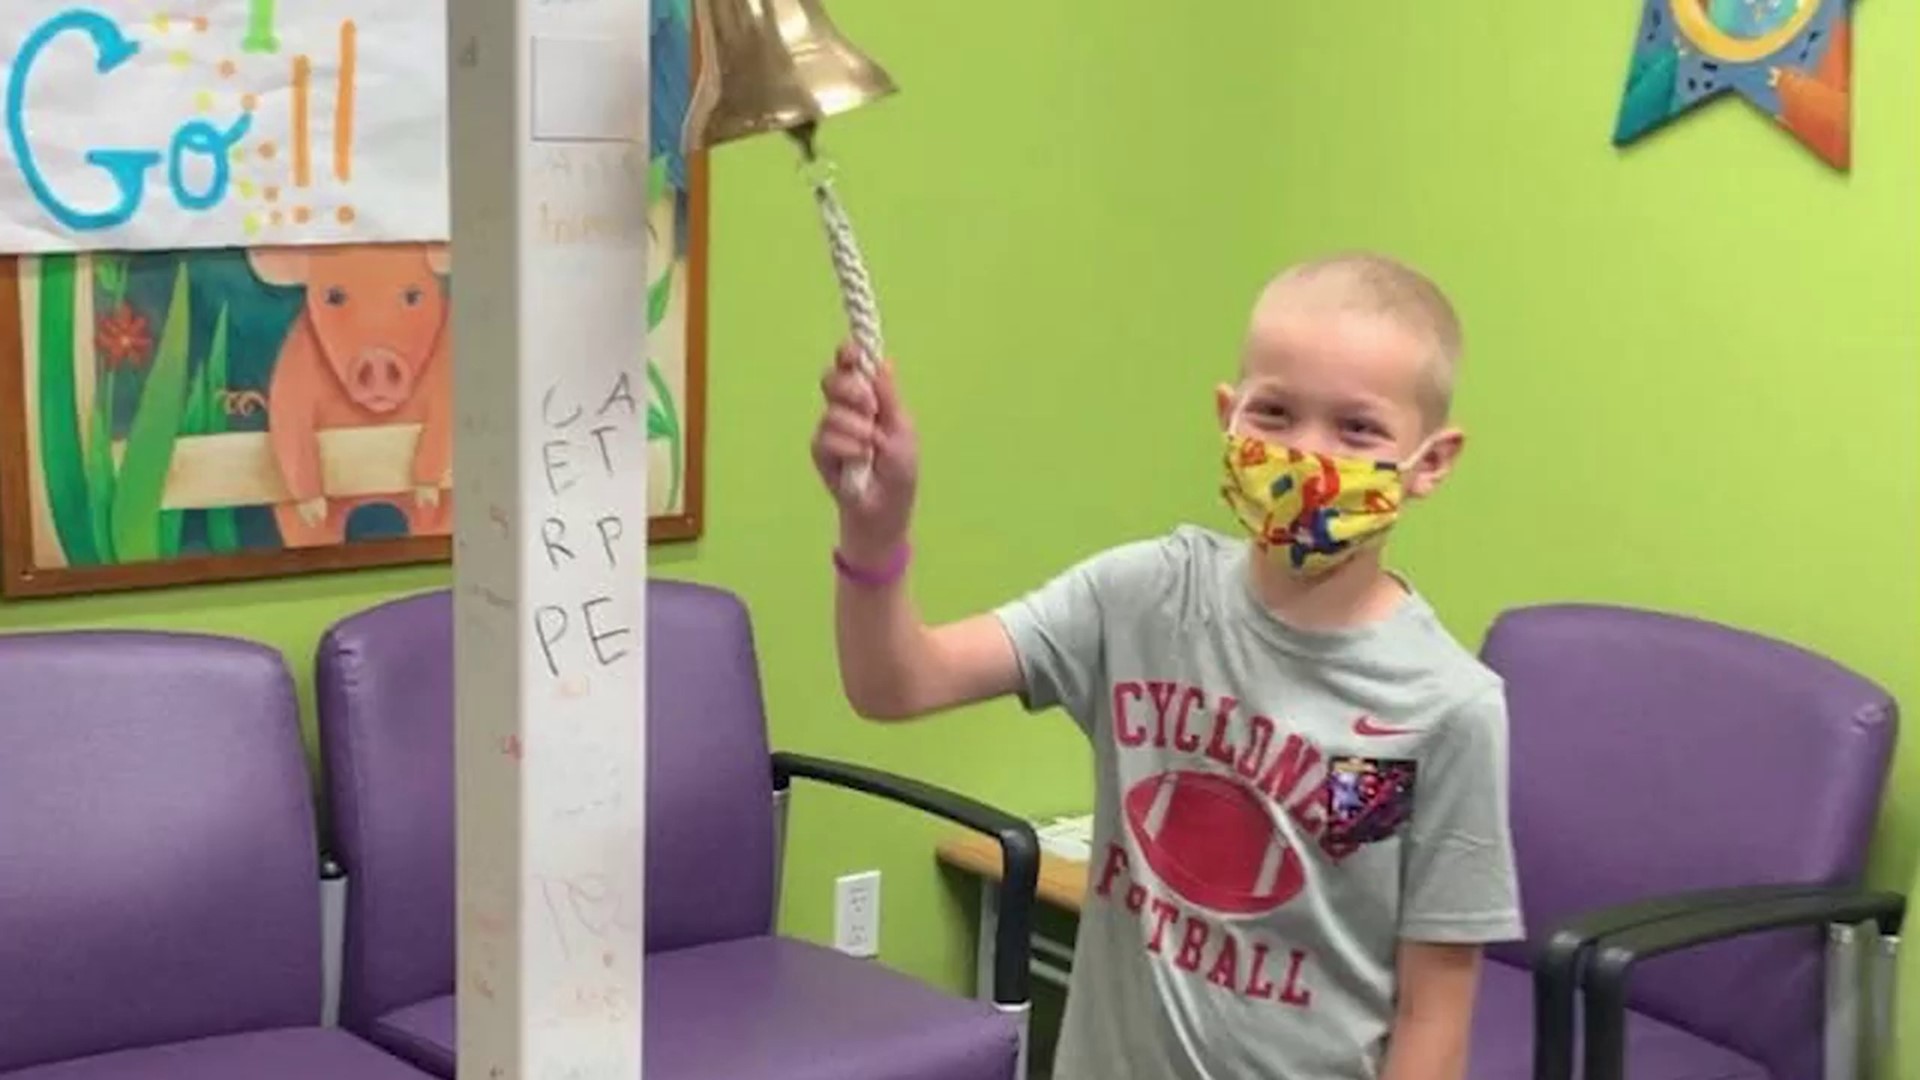 September is Childhood Cancer Awareness month, and a Waukee survivor wants to help other kids "just be kids".